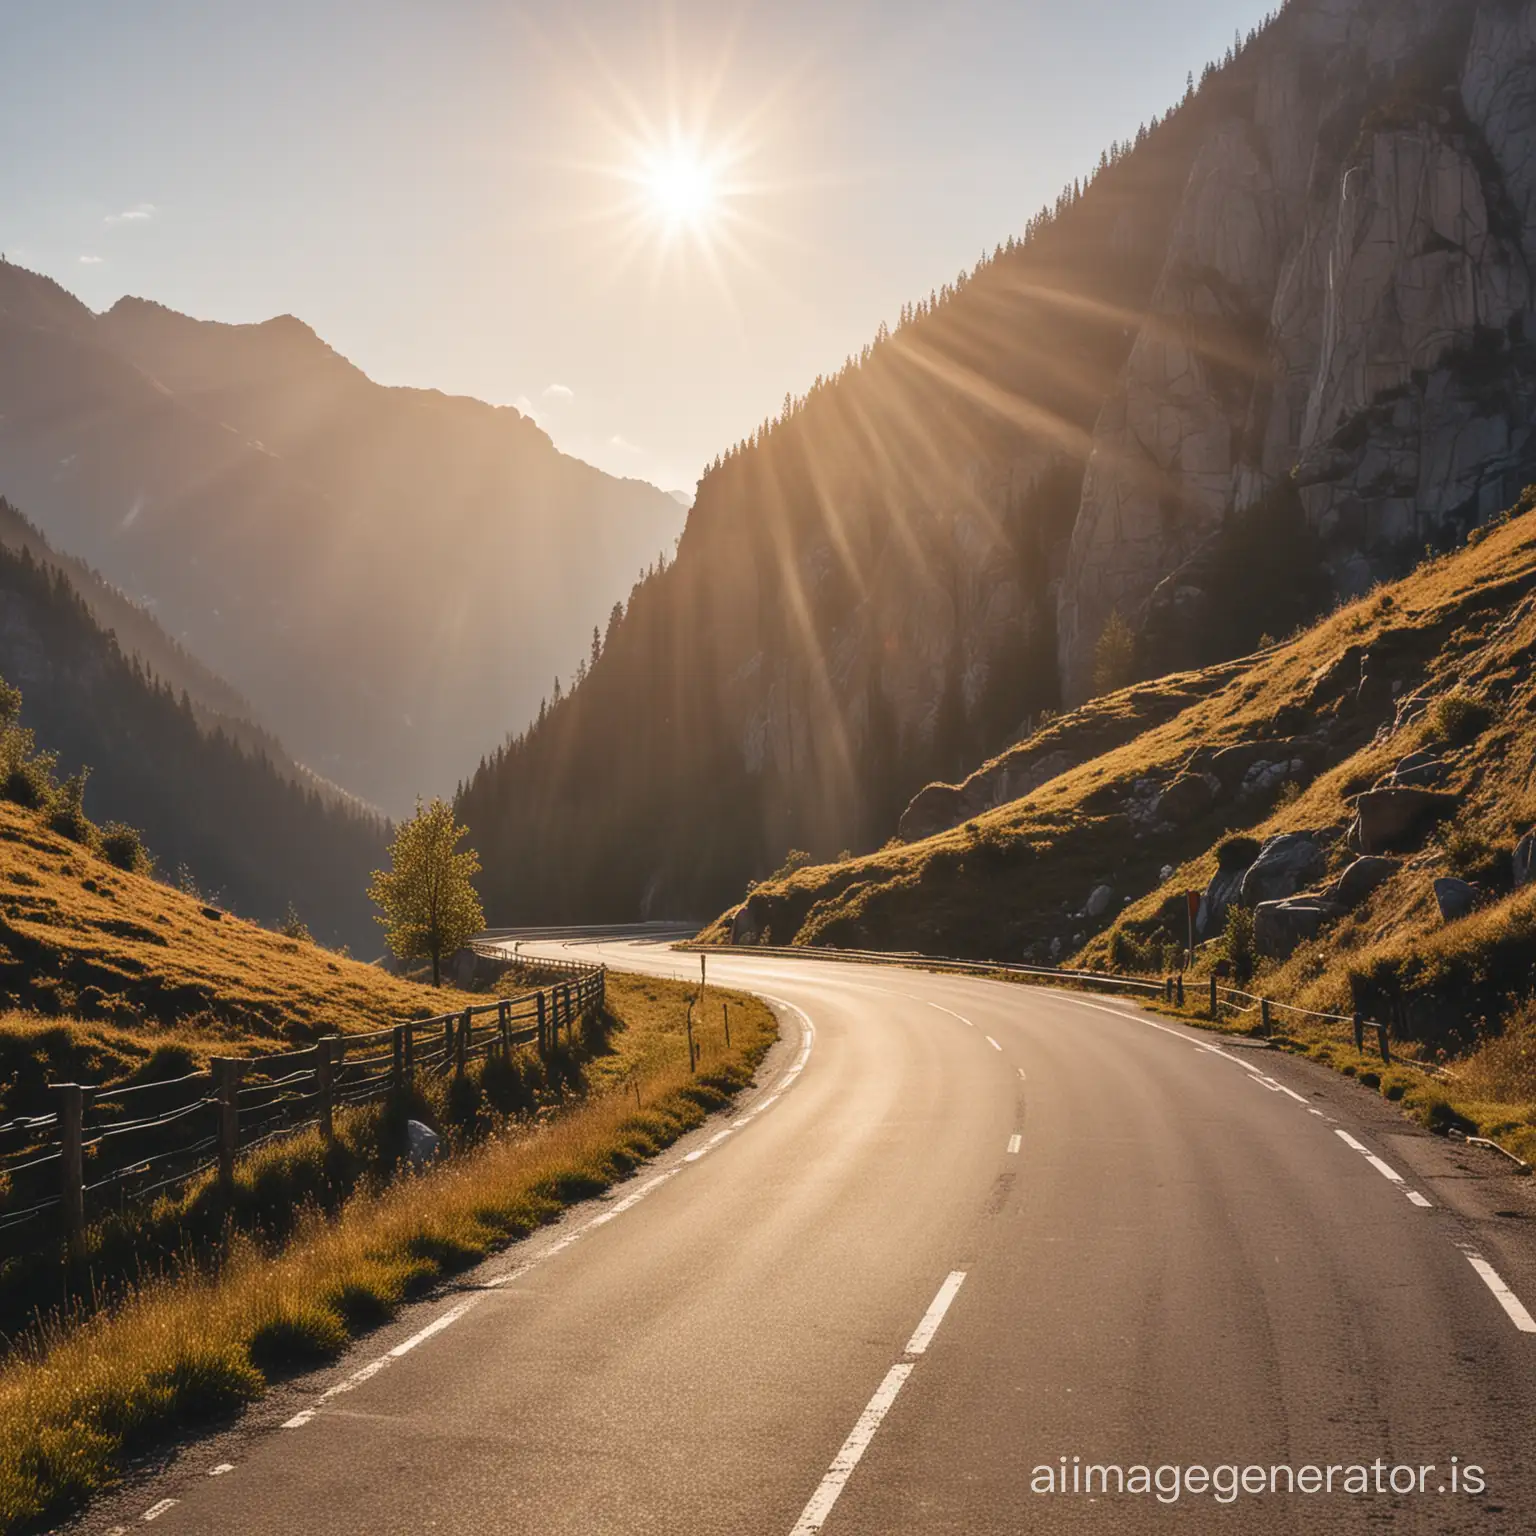 The road in the mountains is bathed in sunlight